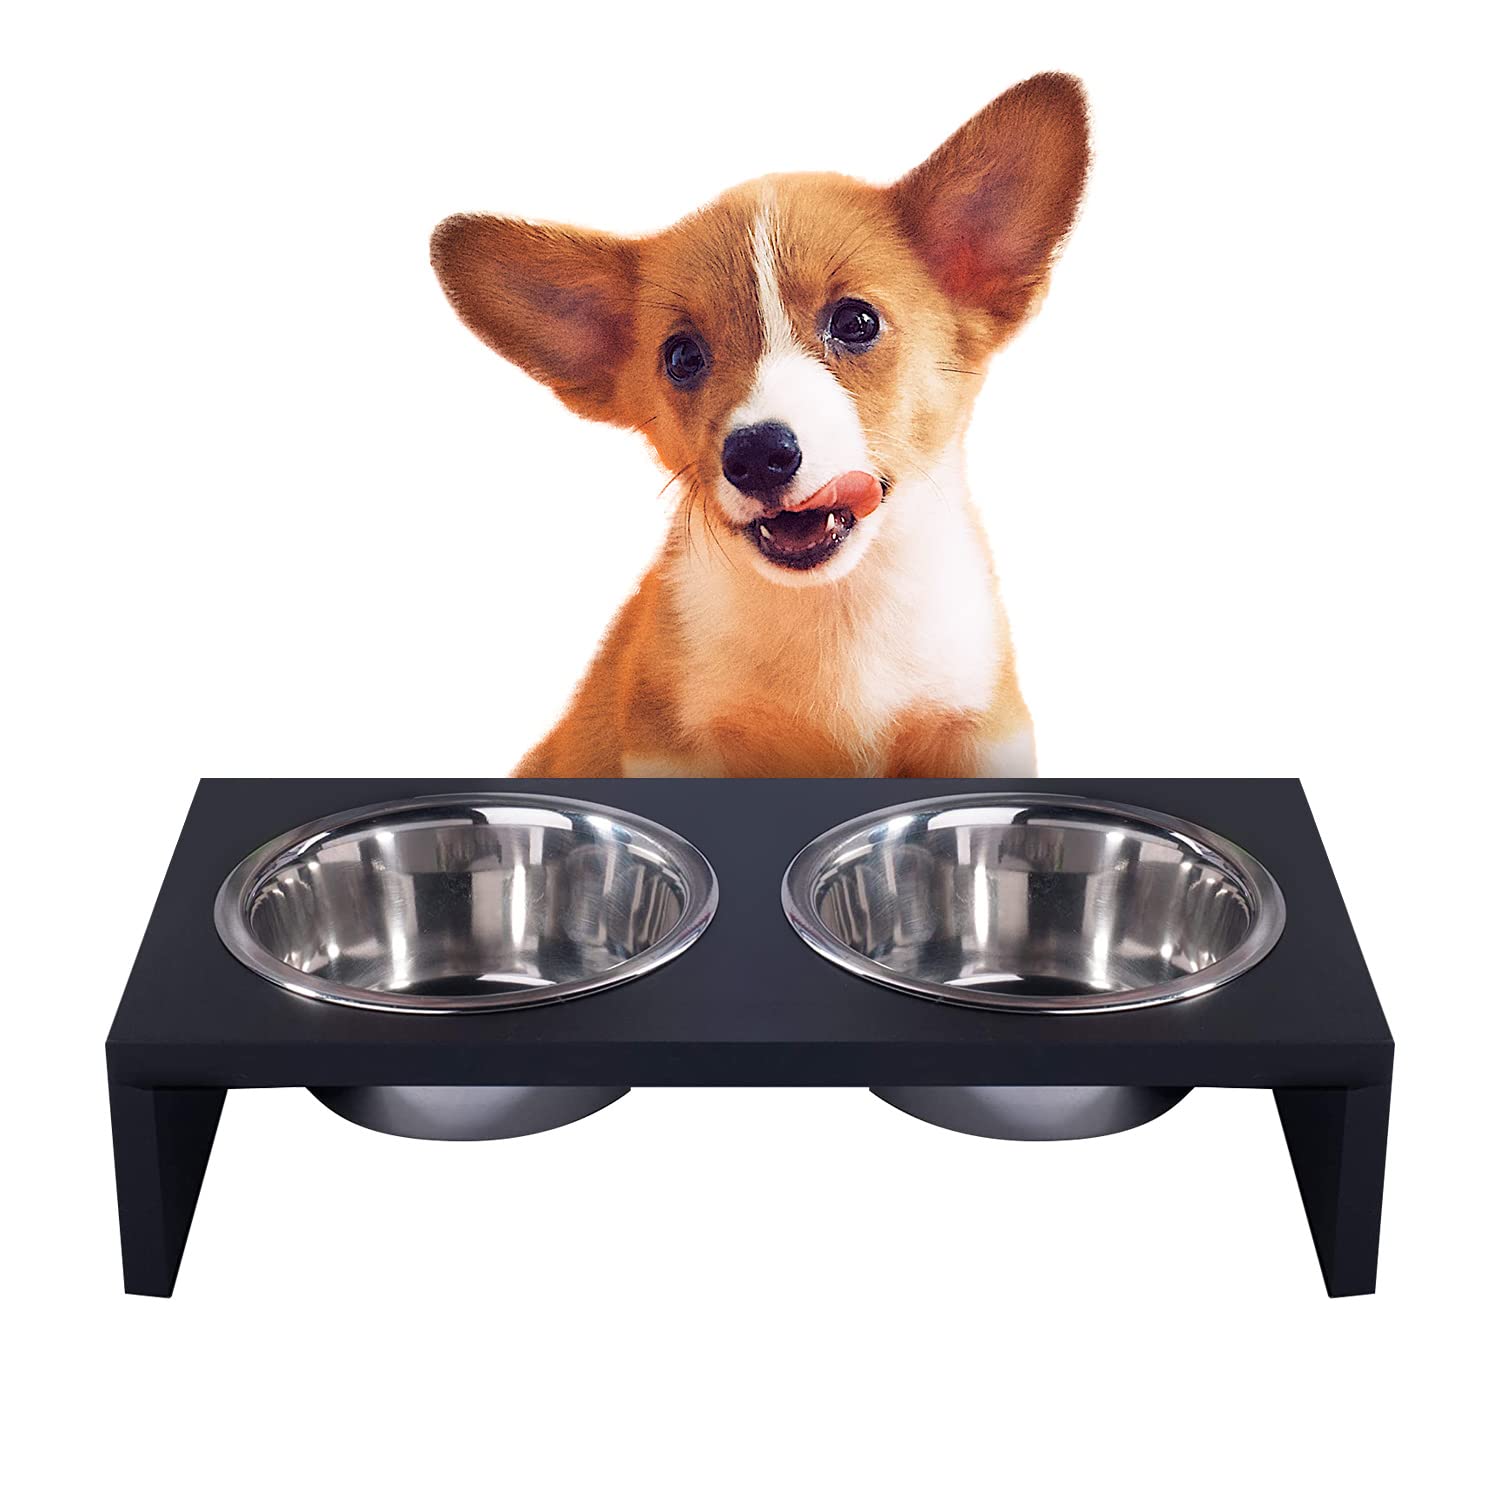 Elevated Dog Bowl Pet Feeder Stainless Steel Raised Food Water Stand w/ 2  Bowls